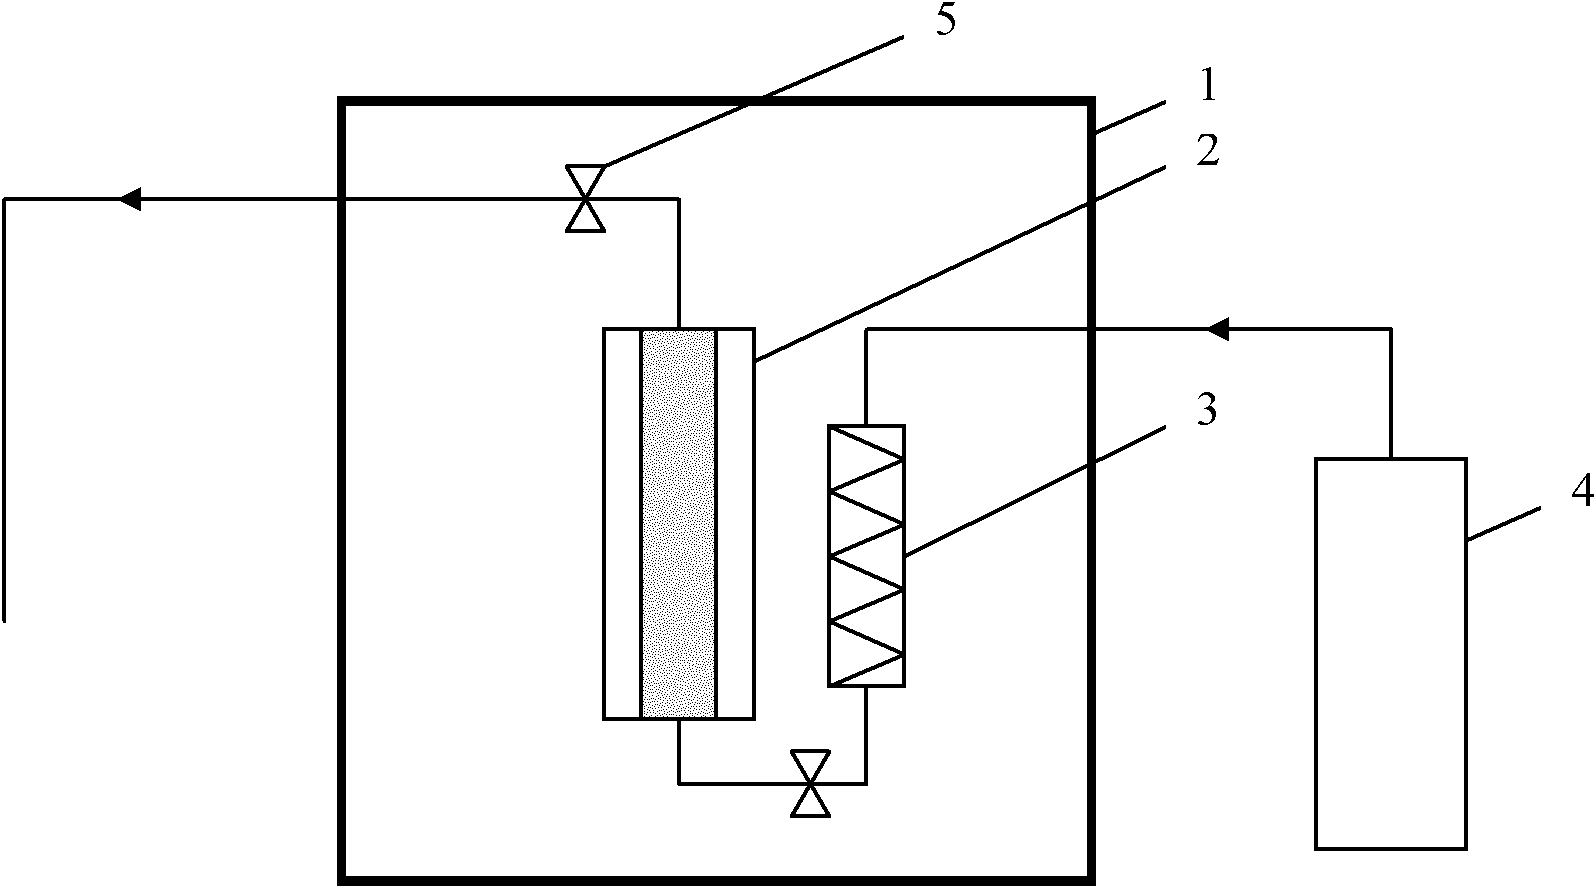 Composite high-temperature profile control method for heavy oil well